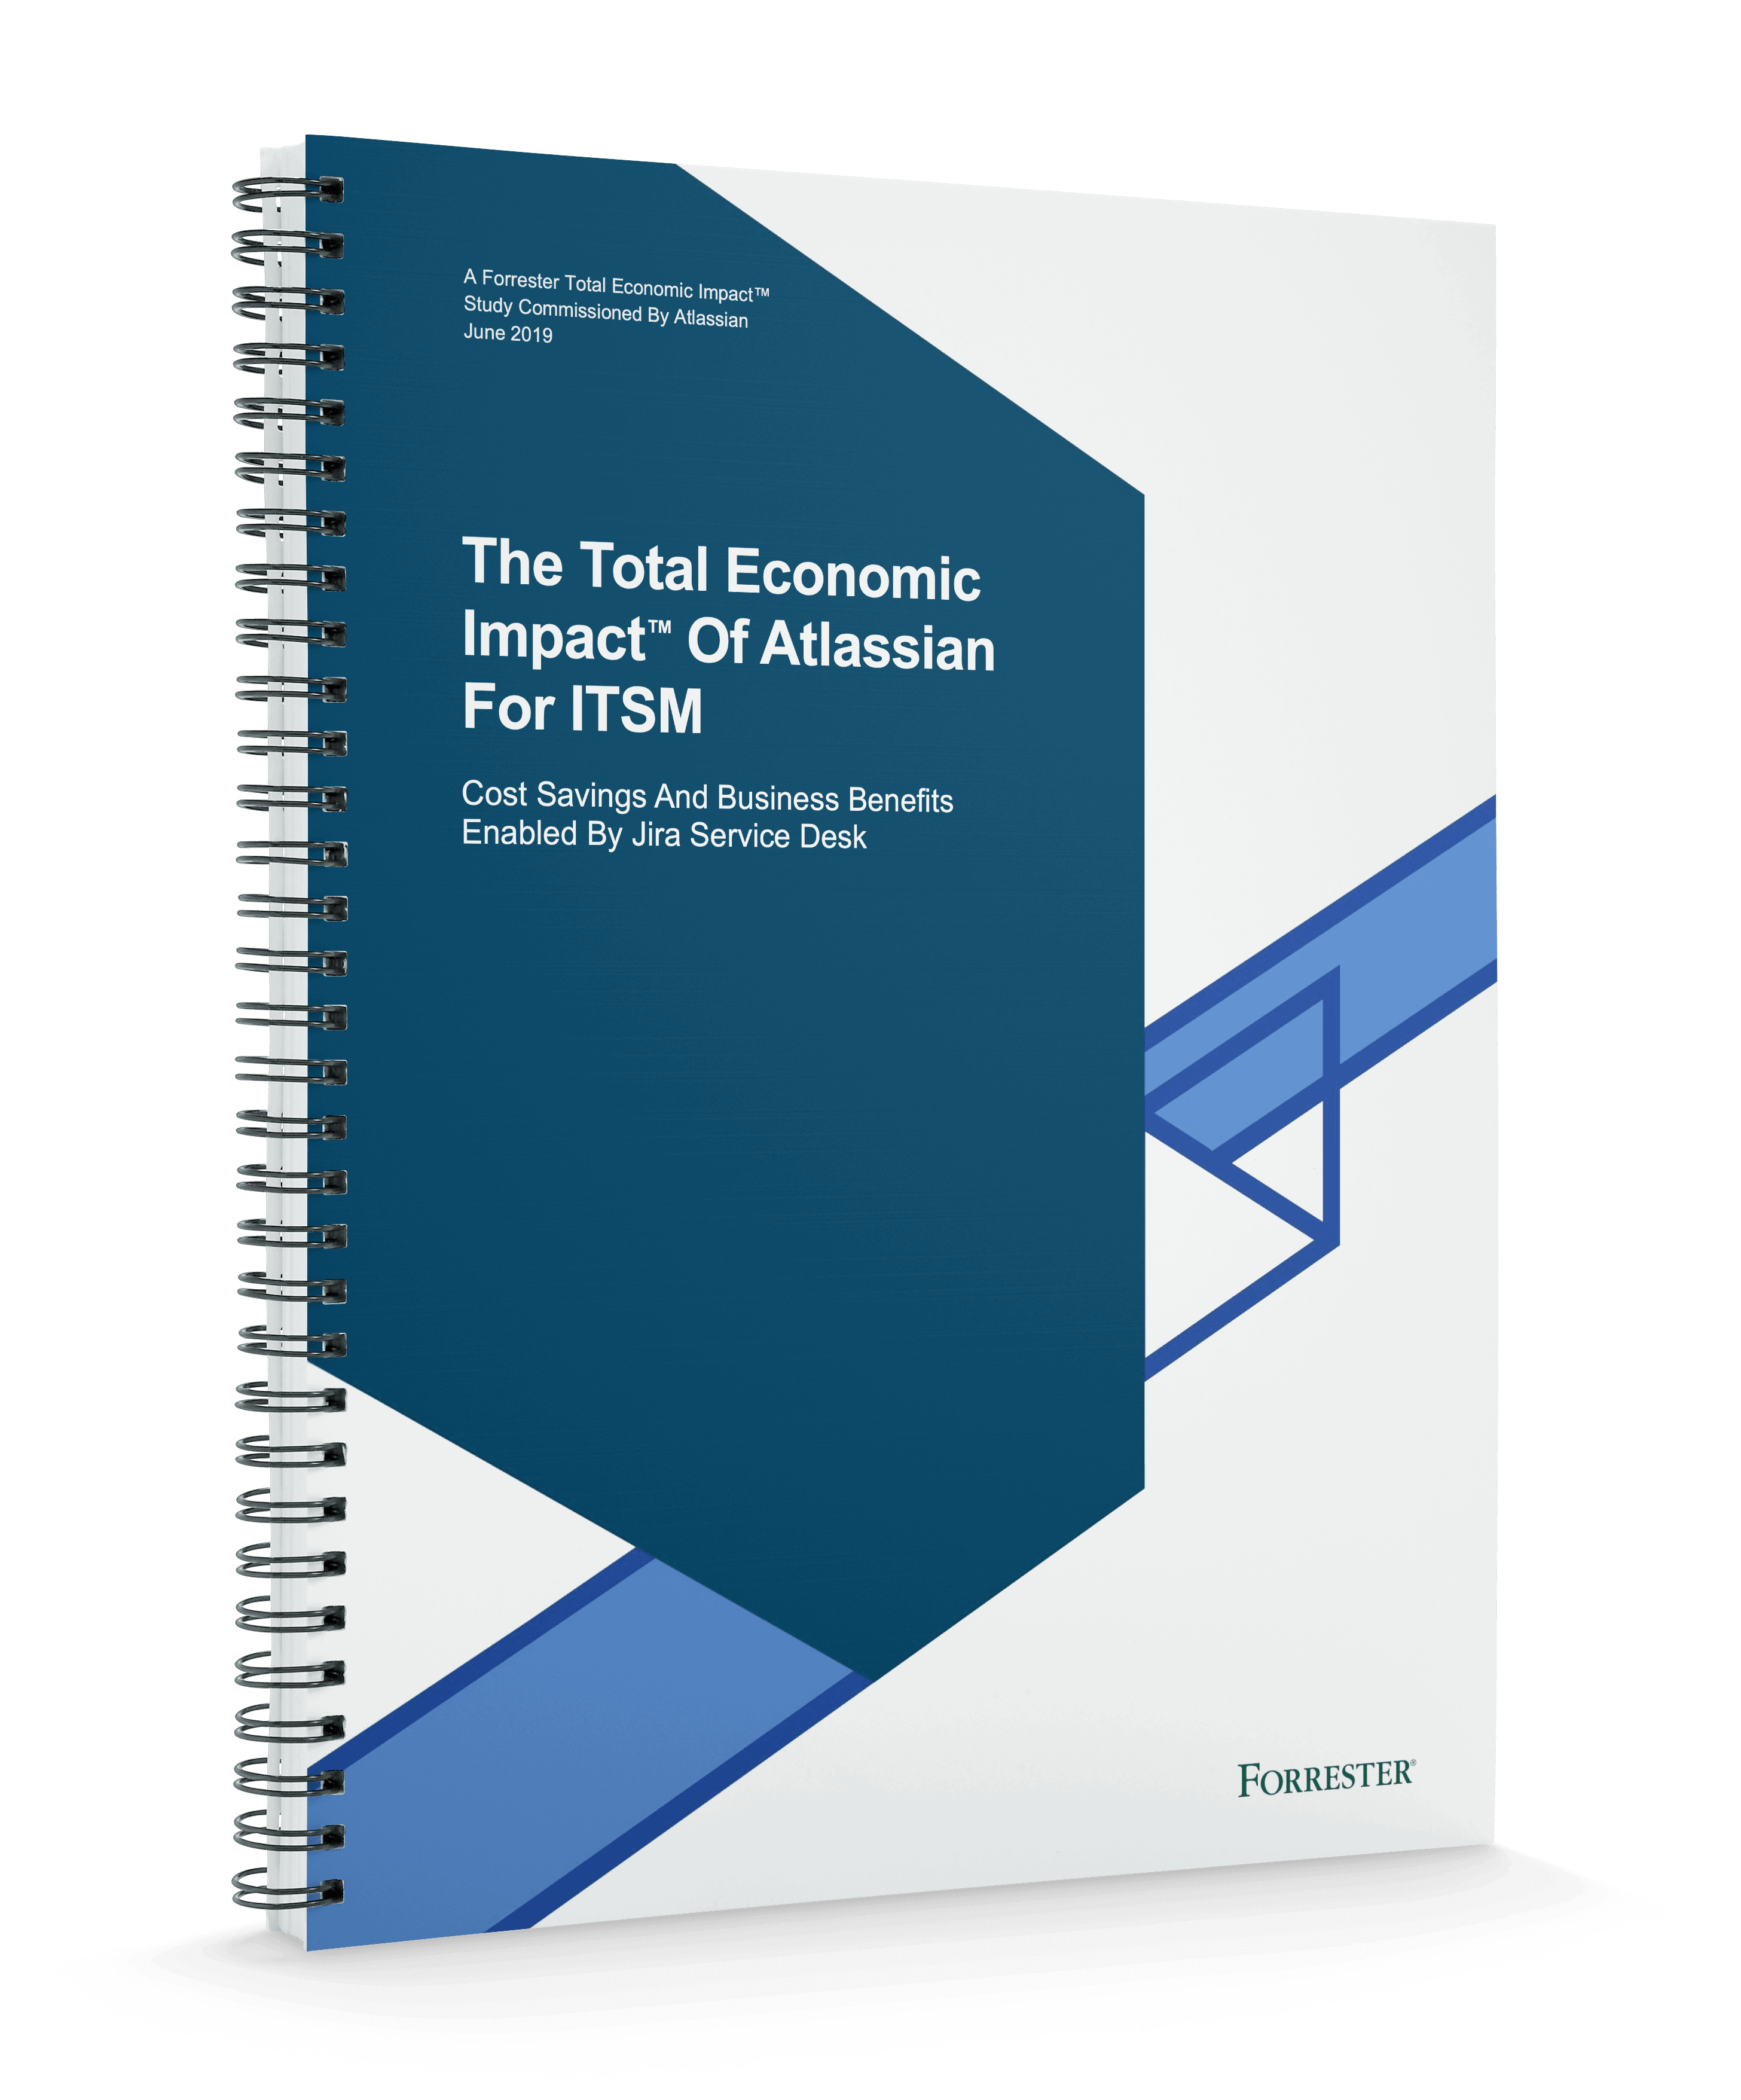 Forrester's Total Economic Impact™ Of Atlassian For ITSM